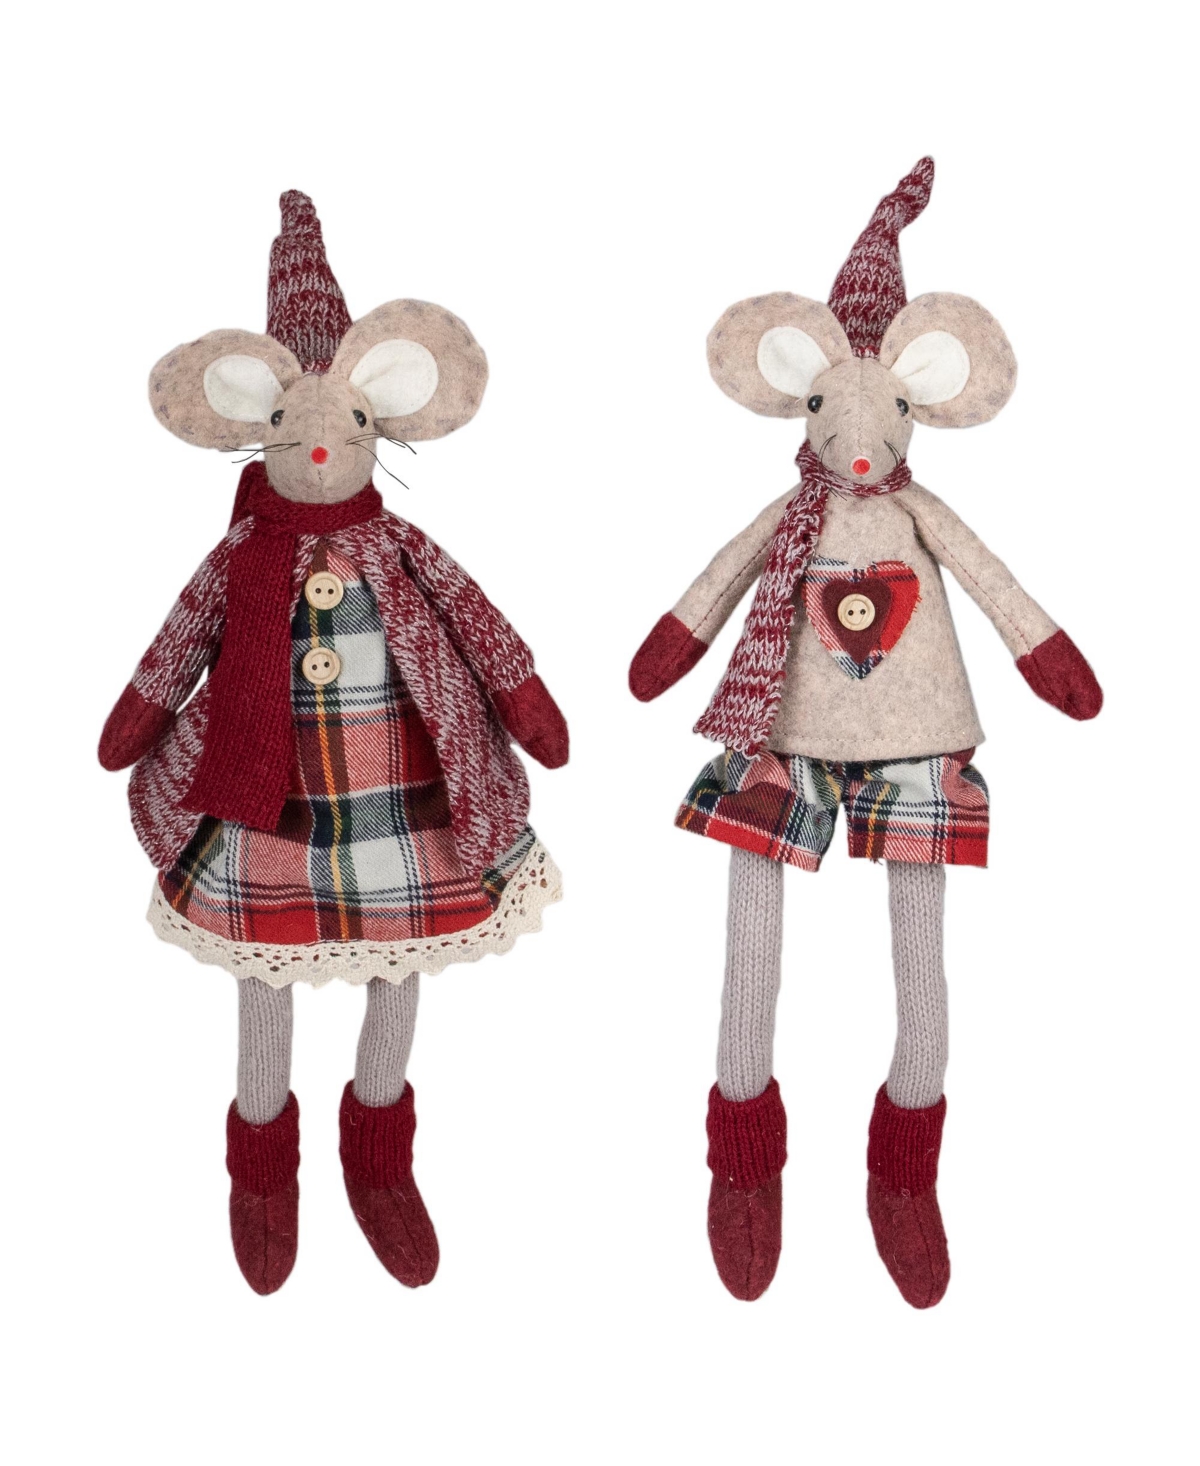 Northlight 17" Boy And Girl Sitting Plush Christmas Mice Figures, Set Of 2 In Red